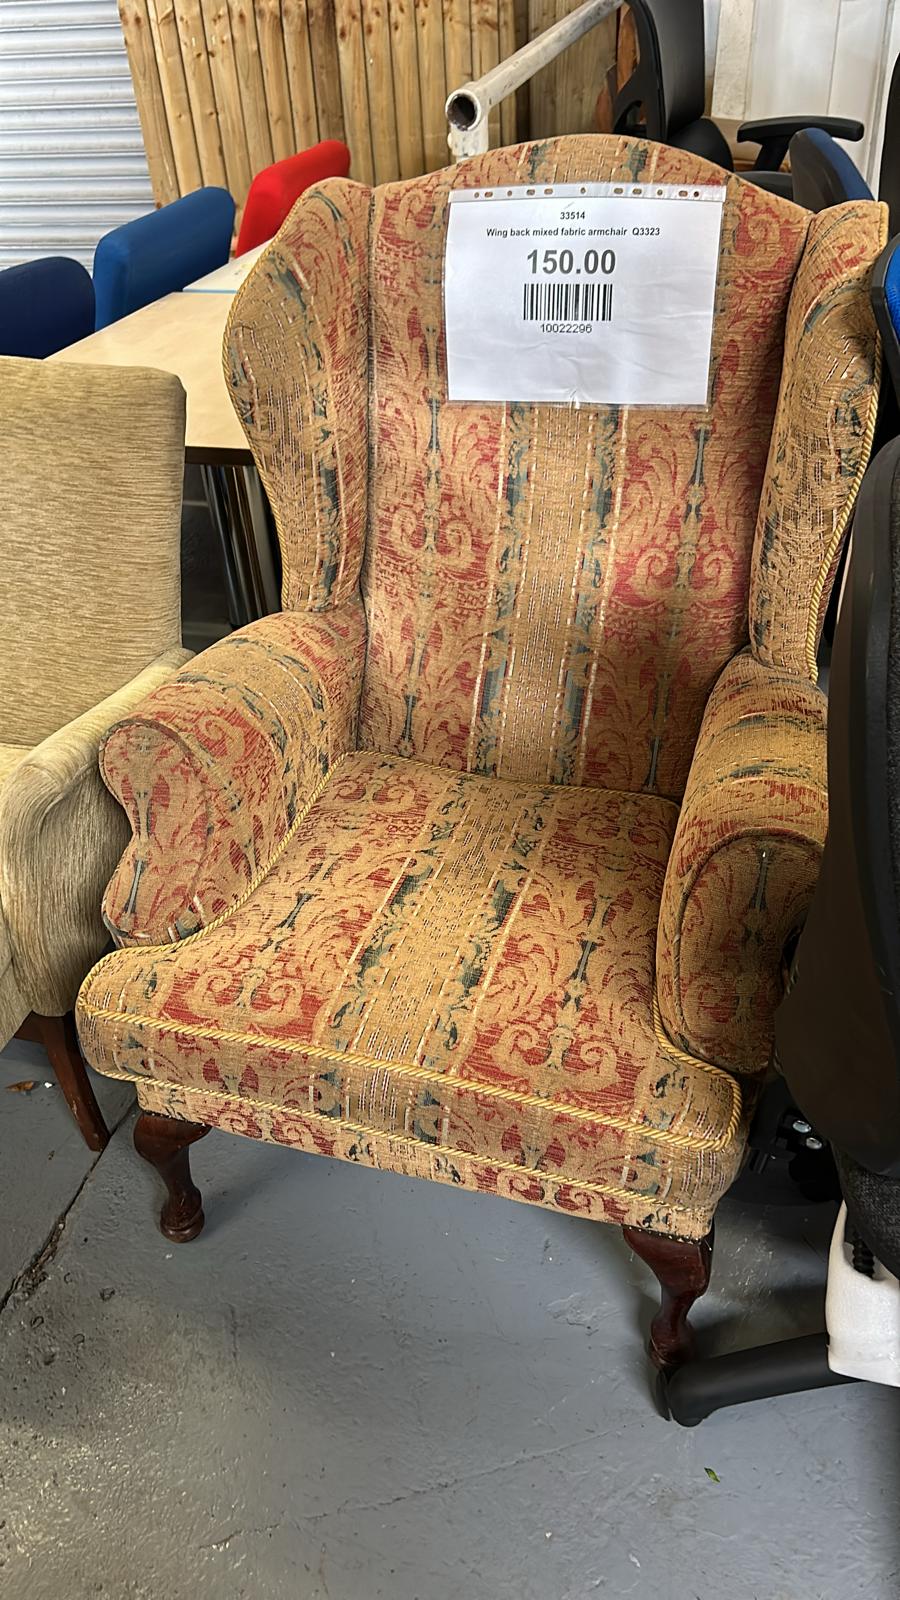 Wing back mixed fabric armchair